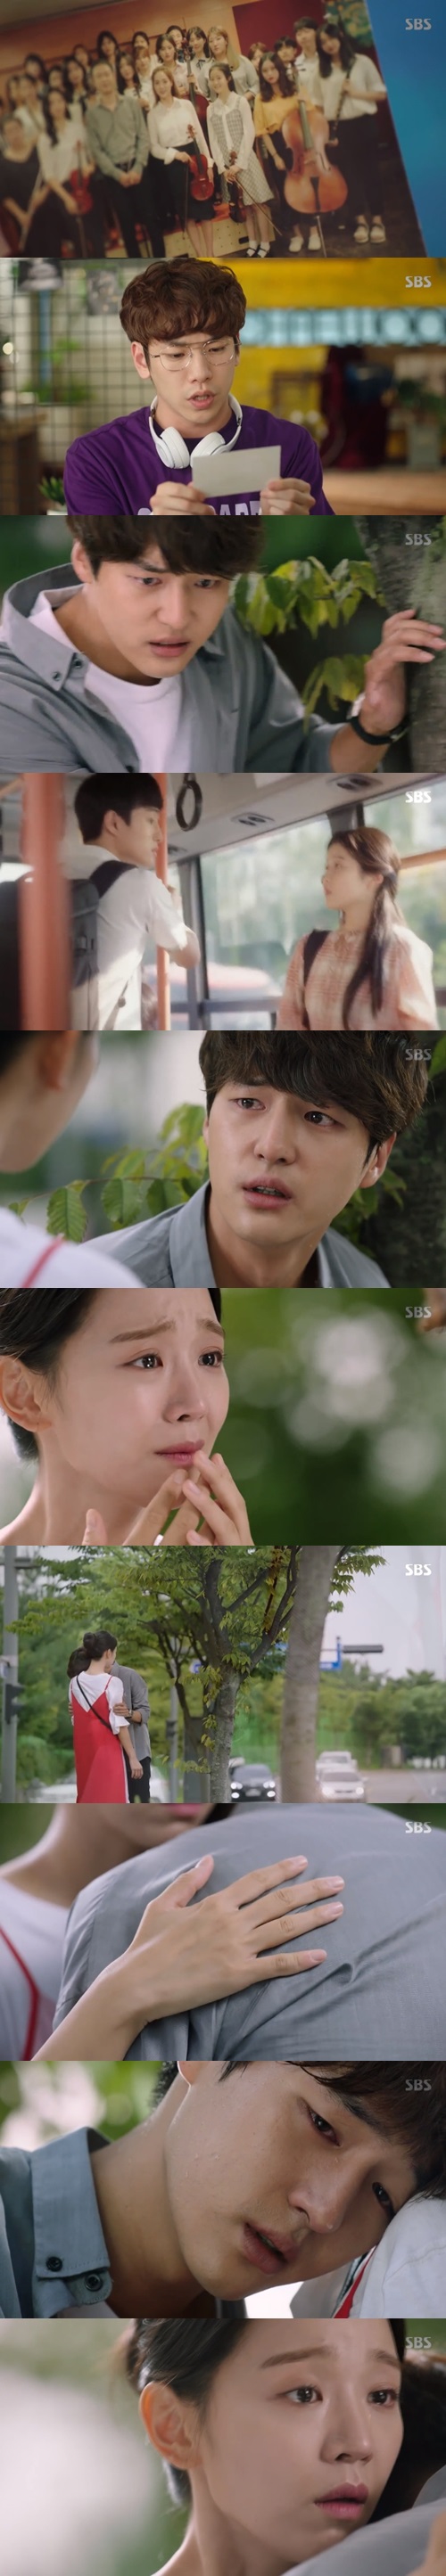 Yang Se-jong became a stronger relationship with Shin Hye-sun in tears.In the 19-20th episode of SBSs monthly drama Thirty but Seventeen, which aired on August 28, Gong Se-jong leaned on Wu Seo-ri (Shin Hye-sun) in the hardest time.On the day of the broadcast, Woo Seo-ri and Gong Woo-jin created a strange atmosphere by themselves due to Yoo Chan (Ahn Hyo-seop)s battery training and Jennifer (Ye Ji-won)s vacation, but the atmosphere was broken due to the loud belly watch.Even the event winner Tteok-bokki coupon was about to have dinner, and Gong Woo-jin, who heard the faint news of Yu-chan, ran away.But they continued to develop their hearts toward each other.Uthery had the opportunity to play the violin on the festival stage with the suggestion of his old teacher, and after hesitant, he decided to take the opportunity.In addition, Gong Woo-jin laughed at the jealous explosion when the director of the scene, who looked beautifully at Usuri, tried to introduce the son of a oriental medicine doctor.Uthery started the violin again, and his old friend NoSumy also remembered.Utheri missed NoSumy, who always took care of himself, and talked to Gong Woo-jin about No Sumy, but did not mention the name.In the meantime, Jin-hyun (Ahn Seung-gyun) looked at Wu-seris 13-year-old photo and showed tension whether Gong Woo-jin could recognize Wu-seri with the photo.In the meantime, Gong Woo-jin once again panicked with Woo Seo-ri and the First Love girl 13 years ago.The trauma of the dead man, who only knew that he was a wuss, suddenly confused. When the wusser was more surprised, Uther said, Are you okay? Ill go there.Stay where you are. Are you sick?I should not identify with a girl 13 years ago.I need to try to recognize that I am different from each other. I recalled Uthery and called him Uthery. And Uthery replied, Yes, I am frost. Utheri was holding such a jinjin and shed tears, and Gong Woojin also shed tears.The scene where Gong Woo-jin is comforted by leaning on Usuri in the hardest time is symbolic.It means that Gong Woo-jin was able to think of separating the girl from the Utheri 13 years ago and suggested overcoming the trauma.In fact, if you find out that the First Love girl is a worrisome 13 years ago, another shock will be added to Gong Woo-jin.Yoo Gyeong-sang